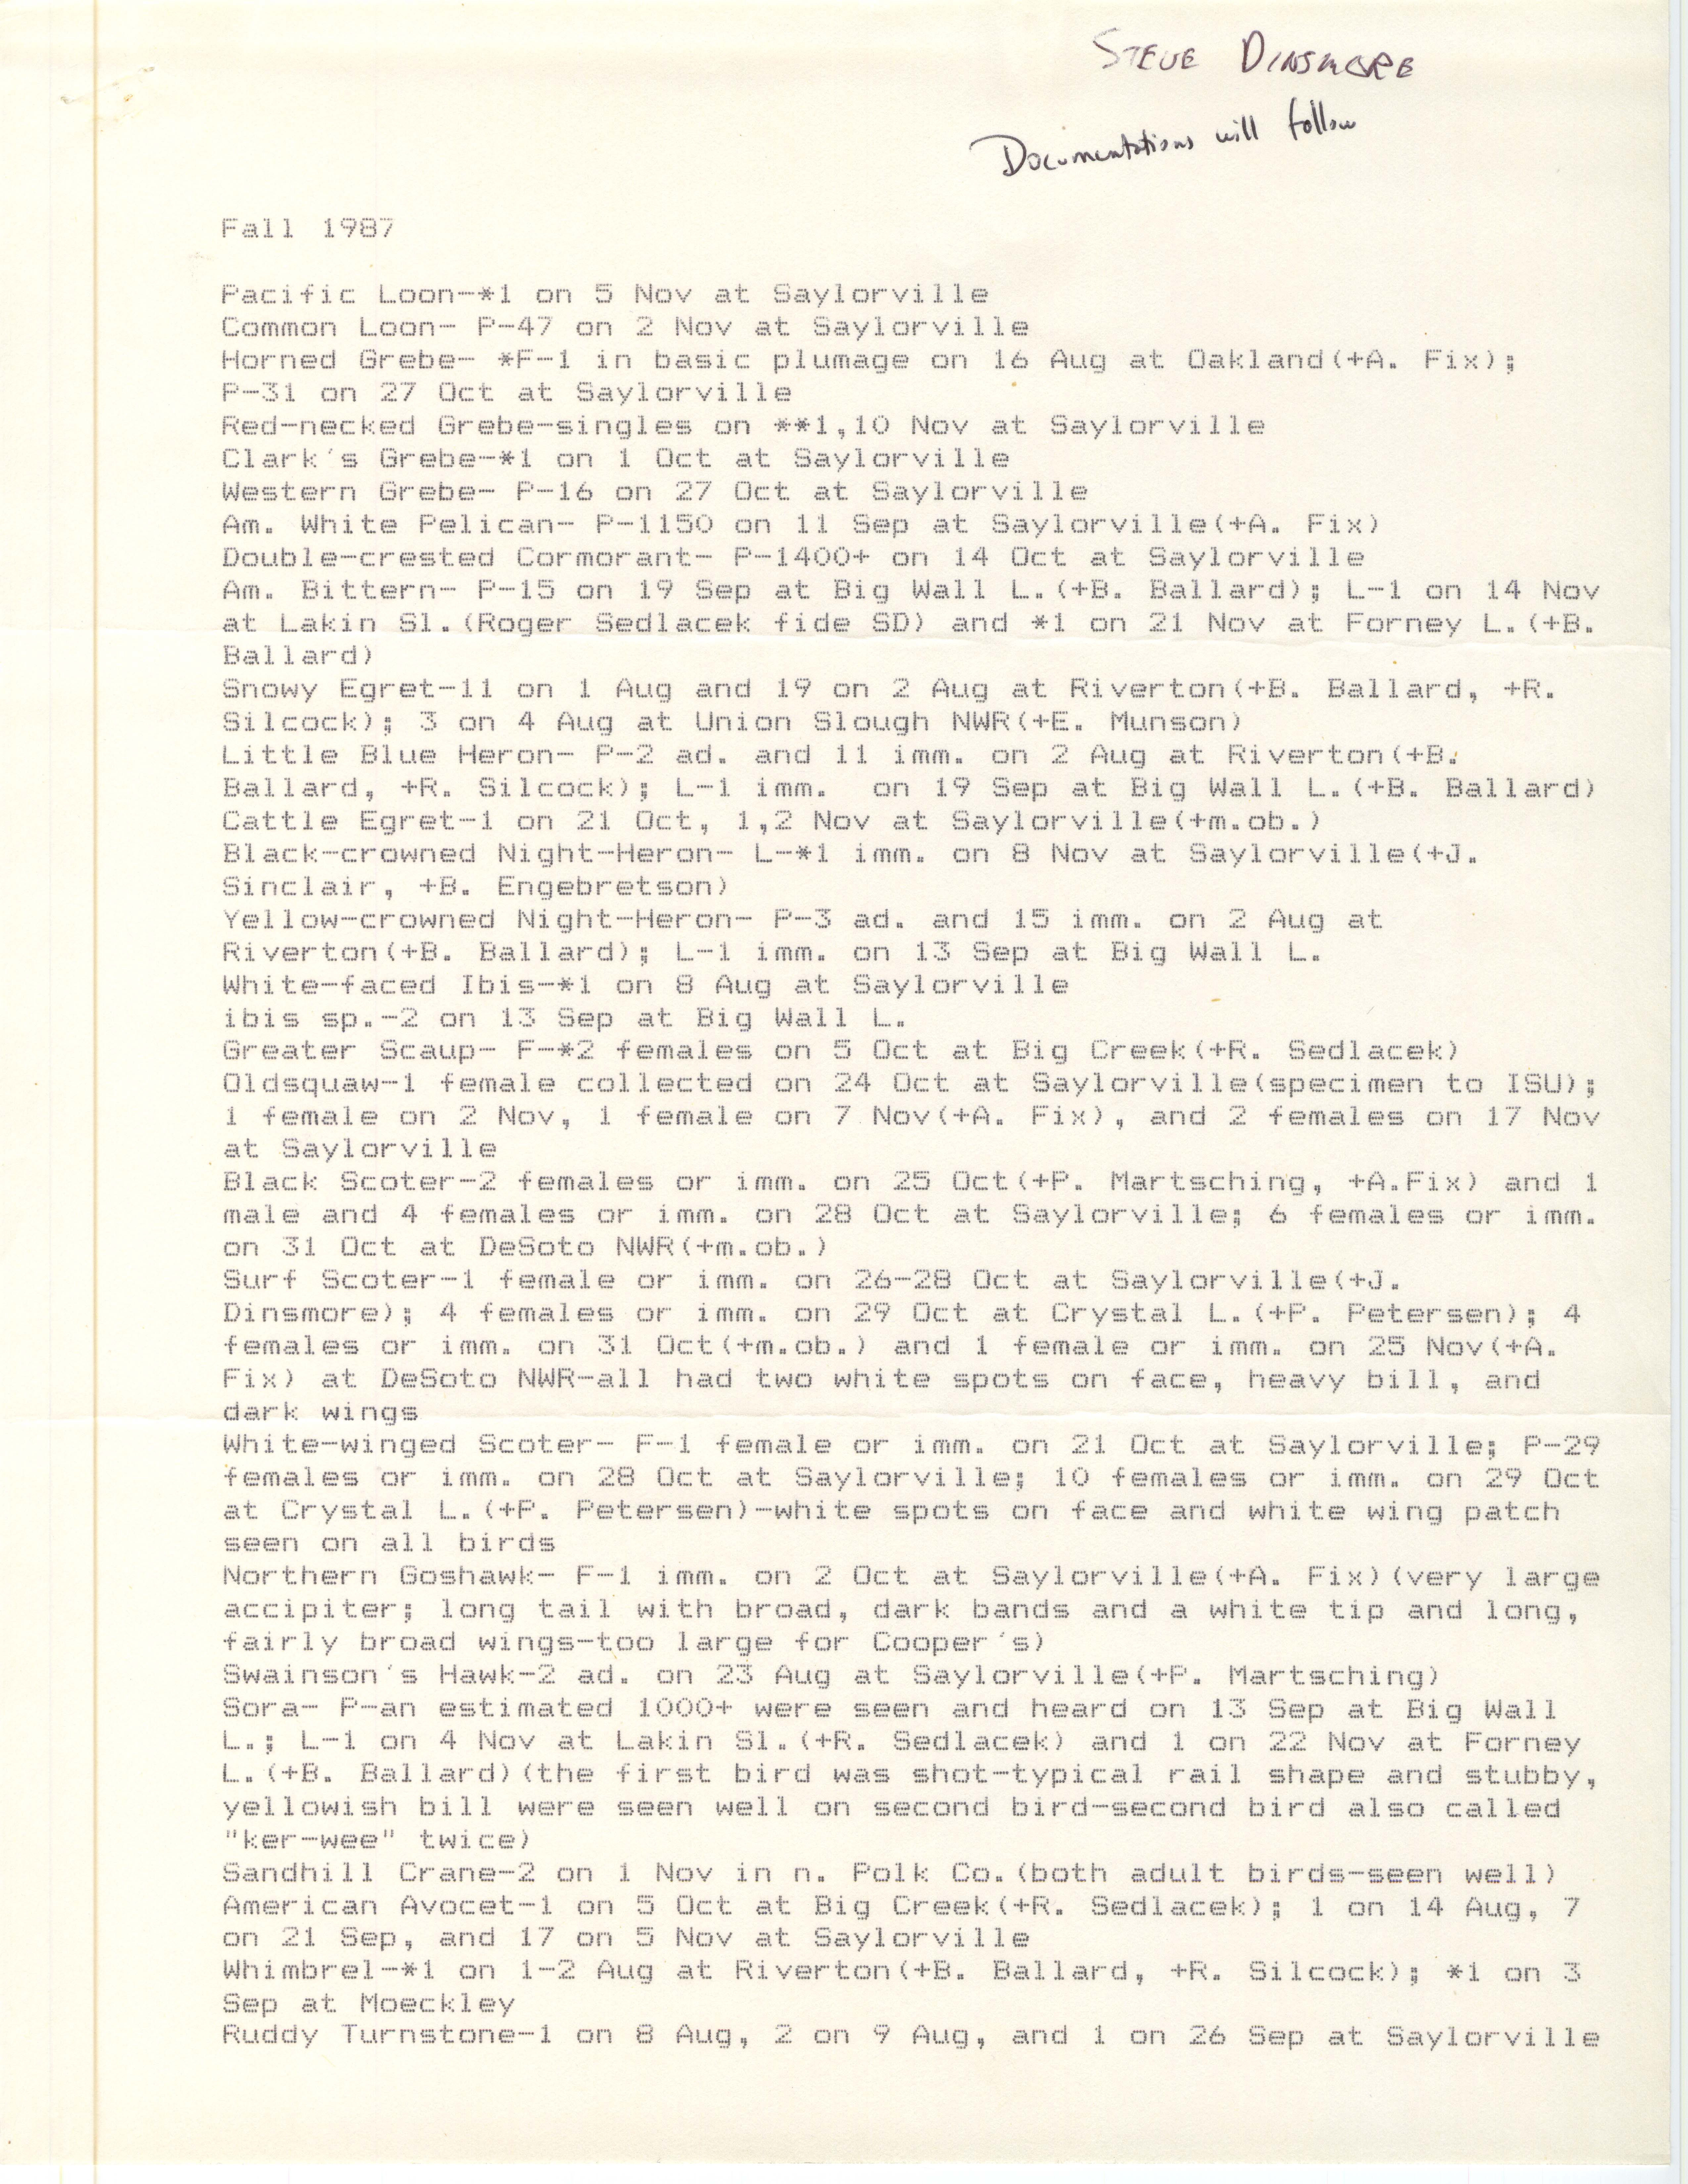 Field notes contributed by Stephen J. Dinsmore, fall 1987